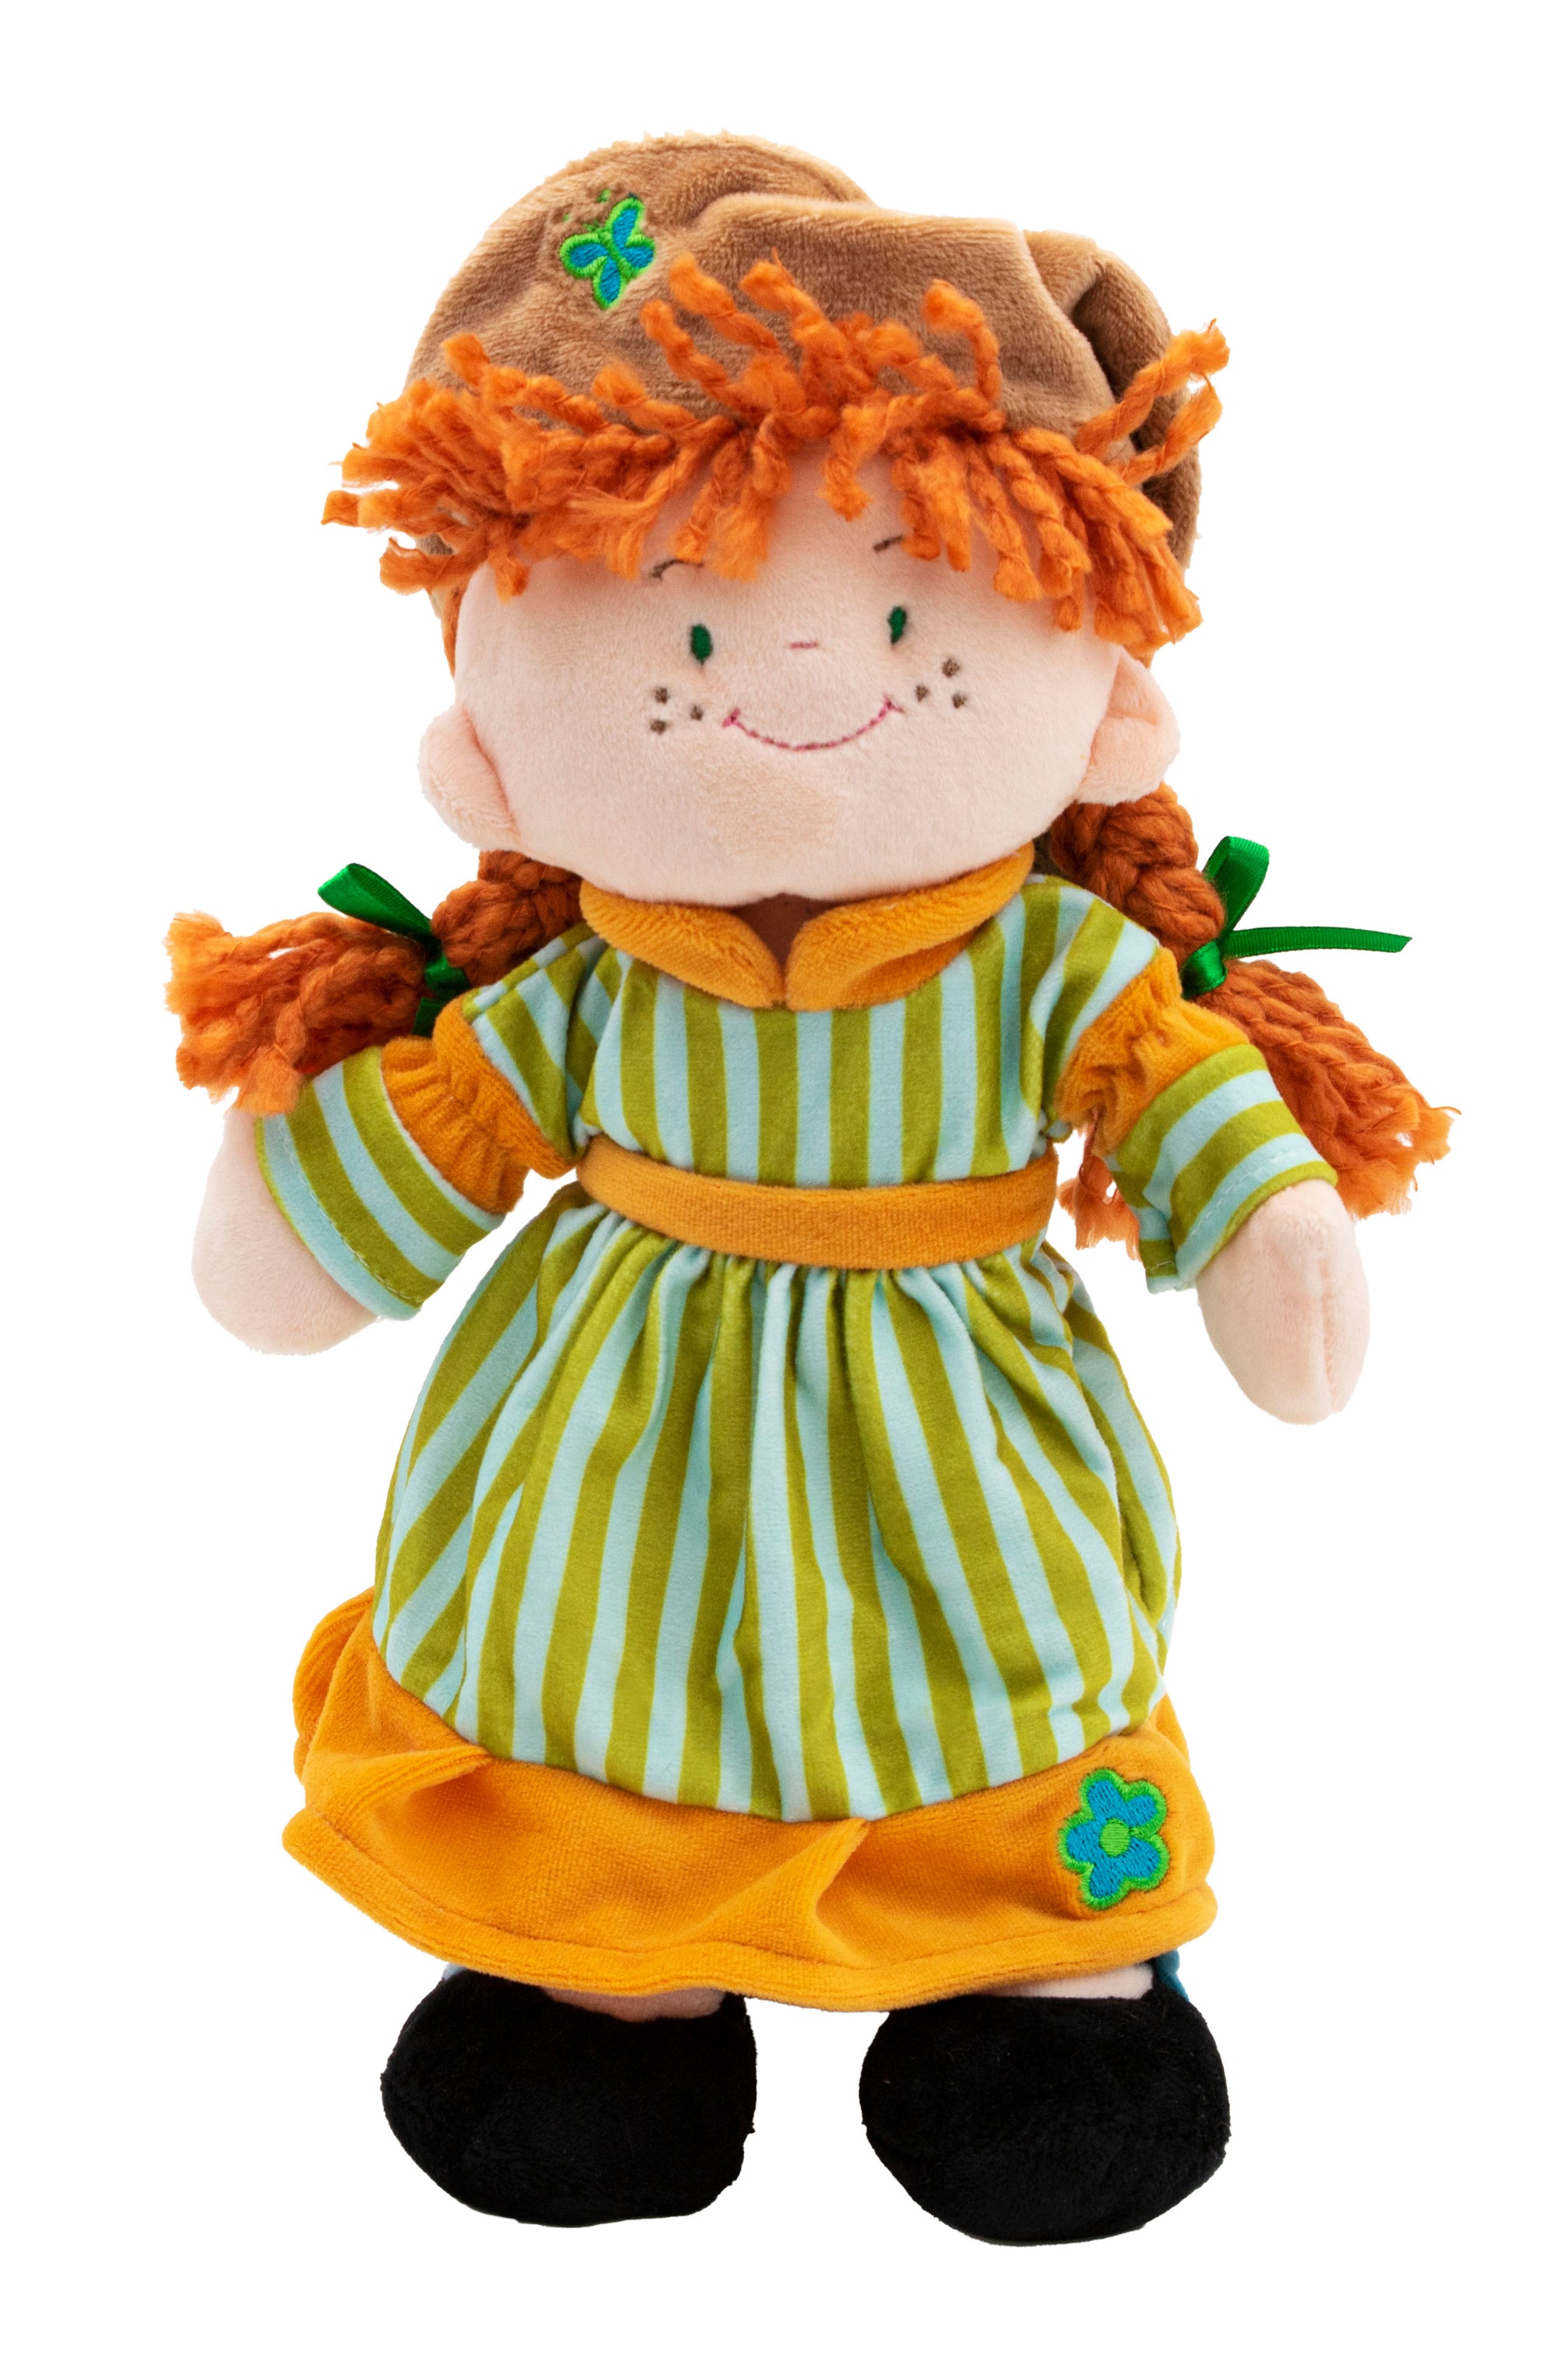 Anne of Green Gables Peluche 9 Inch Doll